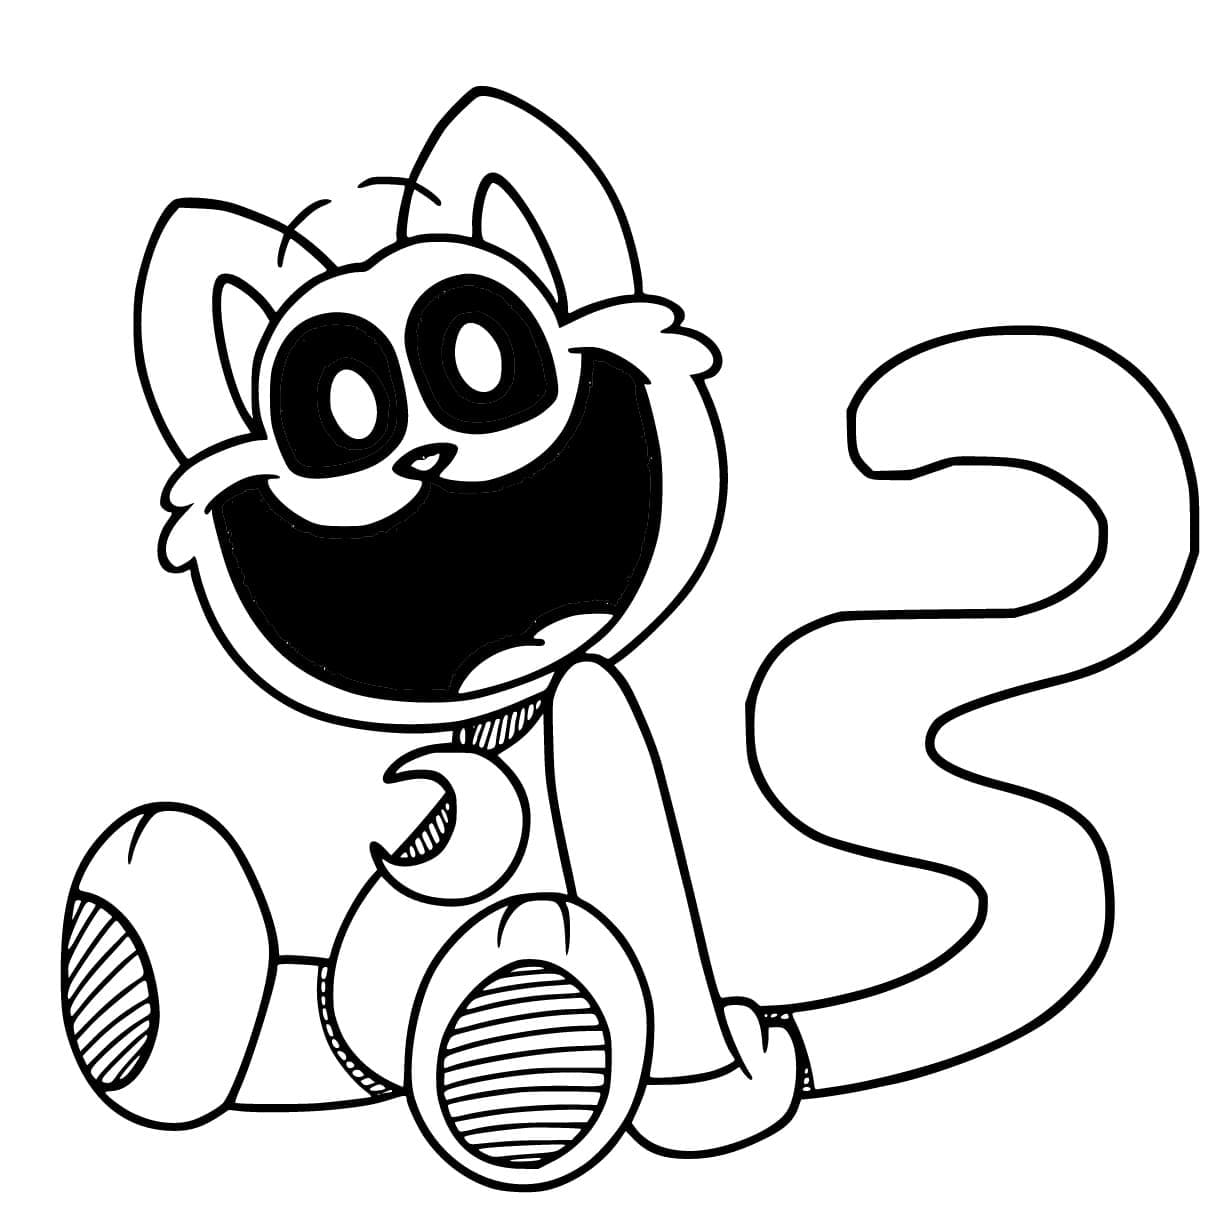 CatNap Smiling Critters coloring page